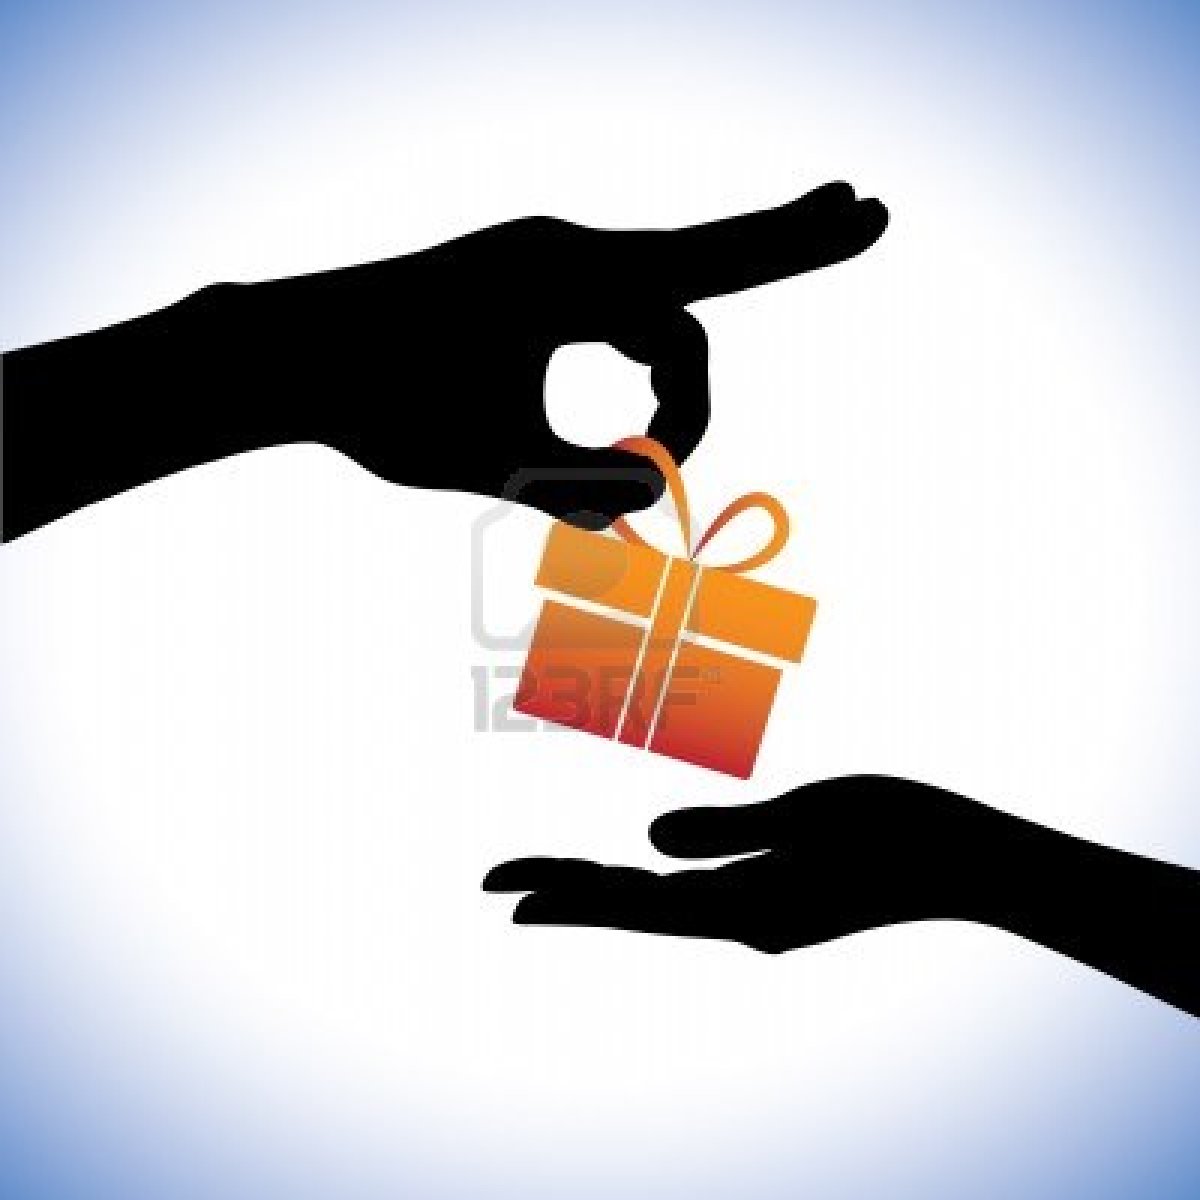 17564956-concept-illustration-of-person-giving-gift-package-to-the-receiver-this-graphic-represents-gifting-t.jpg